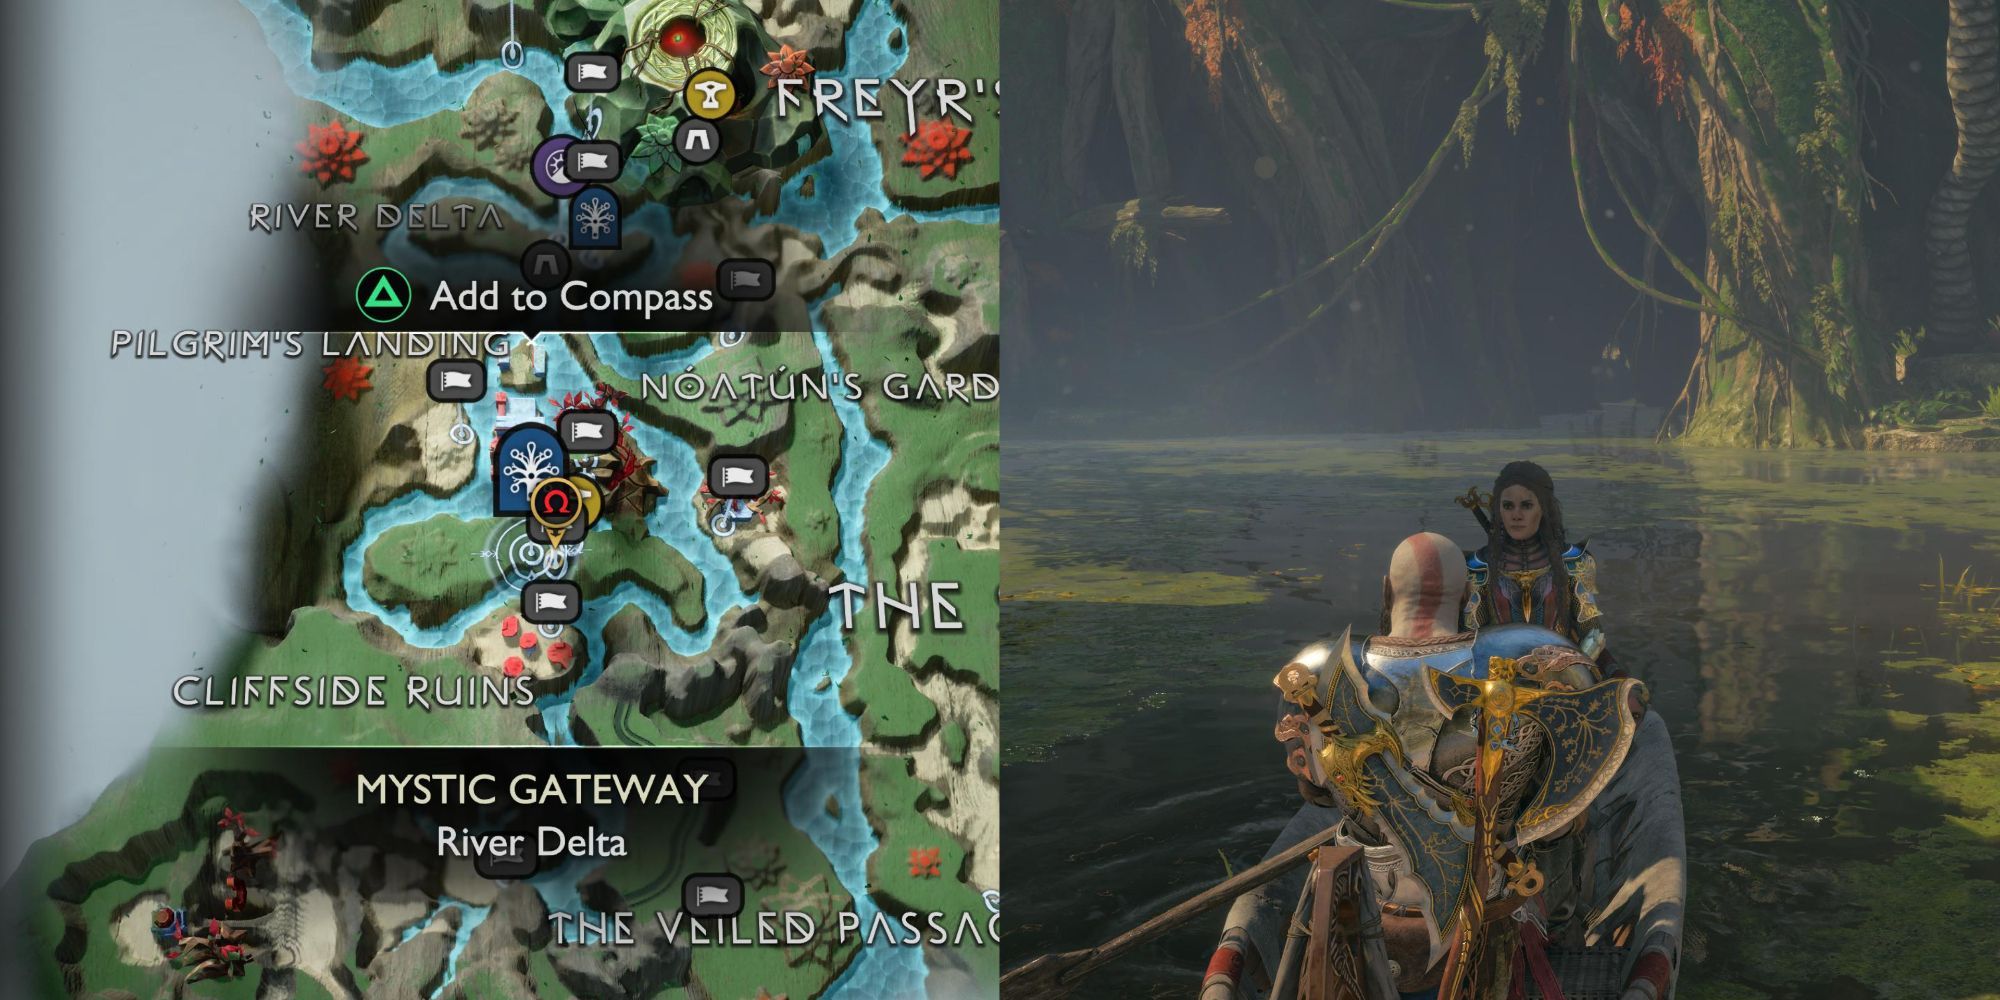 Kratos rows through the River Delta towards the rift location in the River Delta